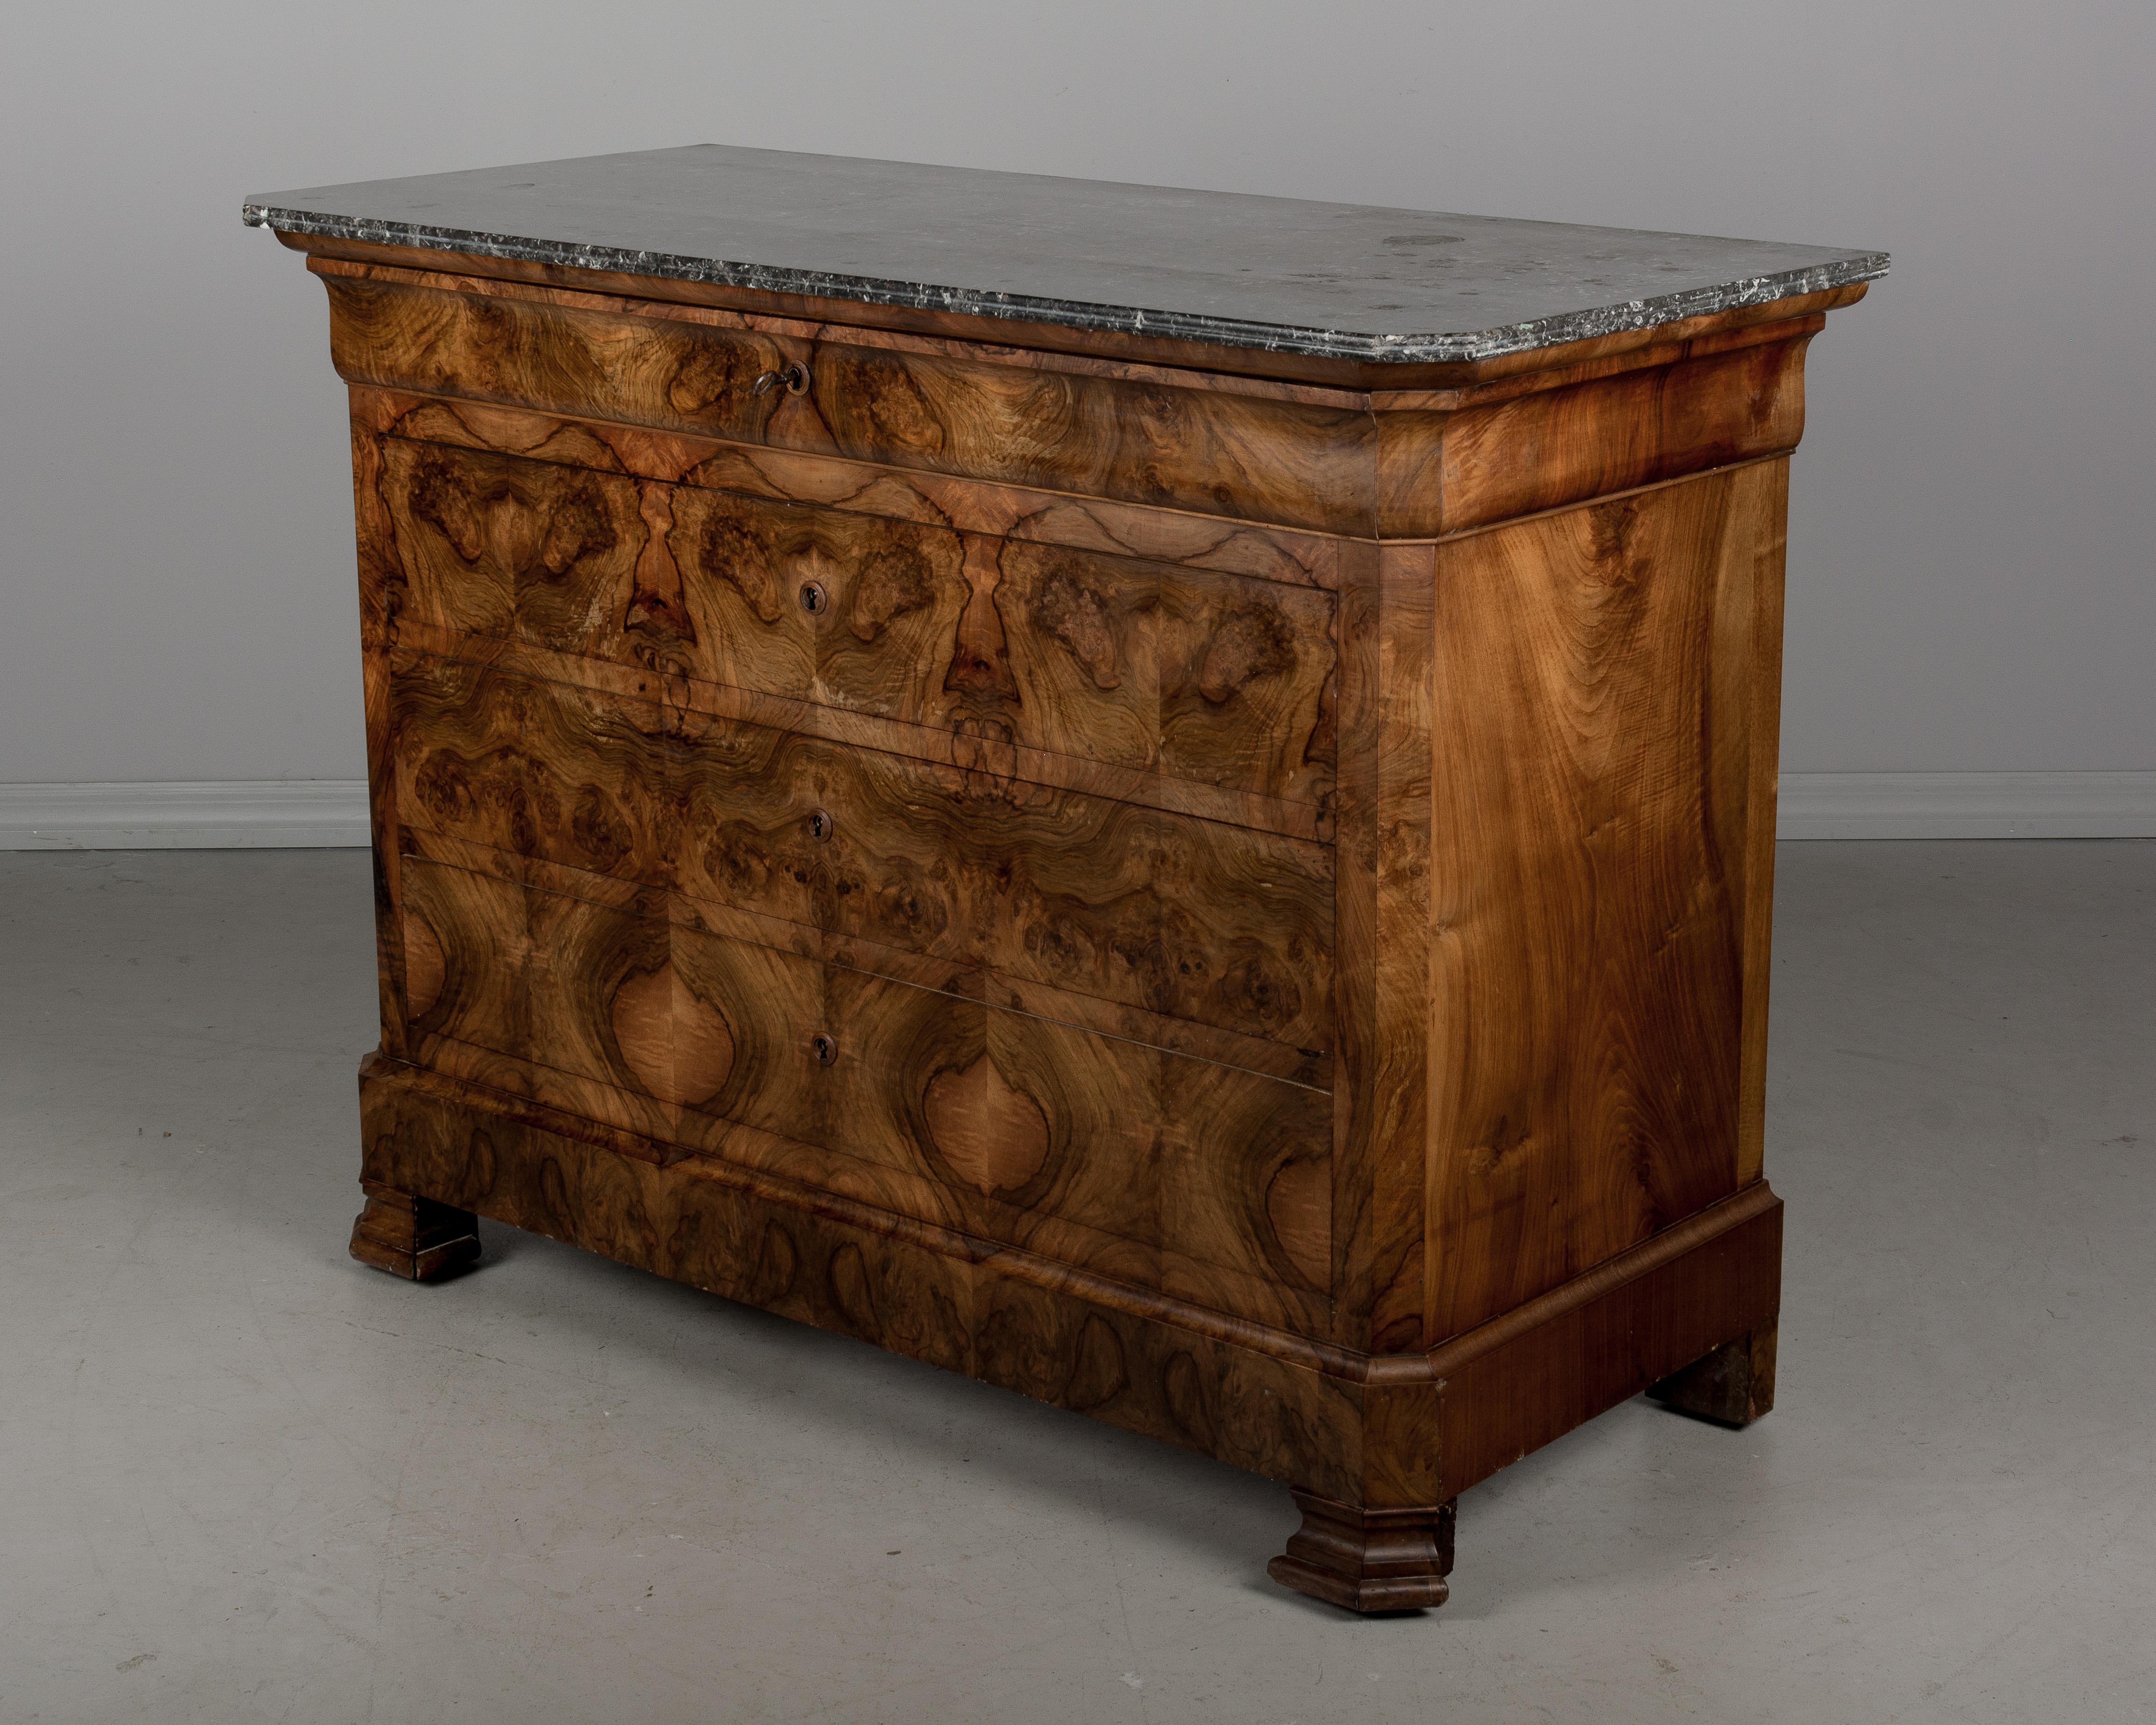 A French Louis Philippe style commode with five dovetailed drawers and original St. Anne grey marble top. Front has beautifully patterned book-matched veneer of walnut. Four locks are in working order, with one key. Note: two pieces of trim are